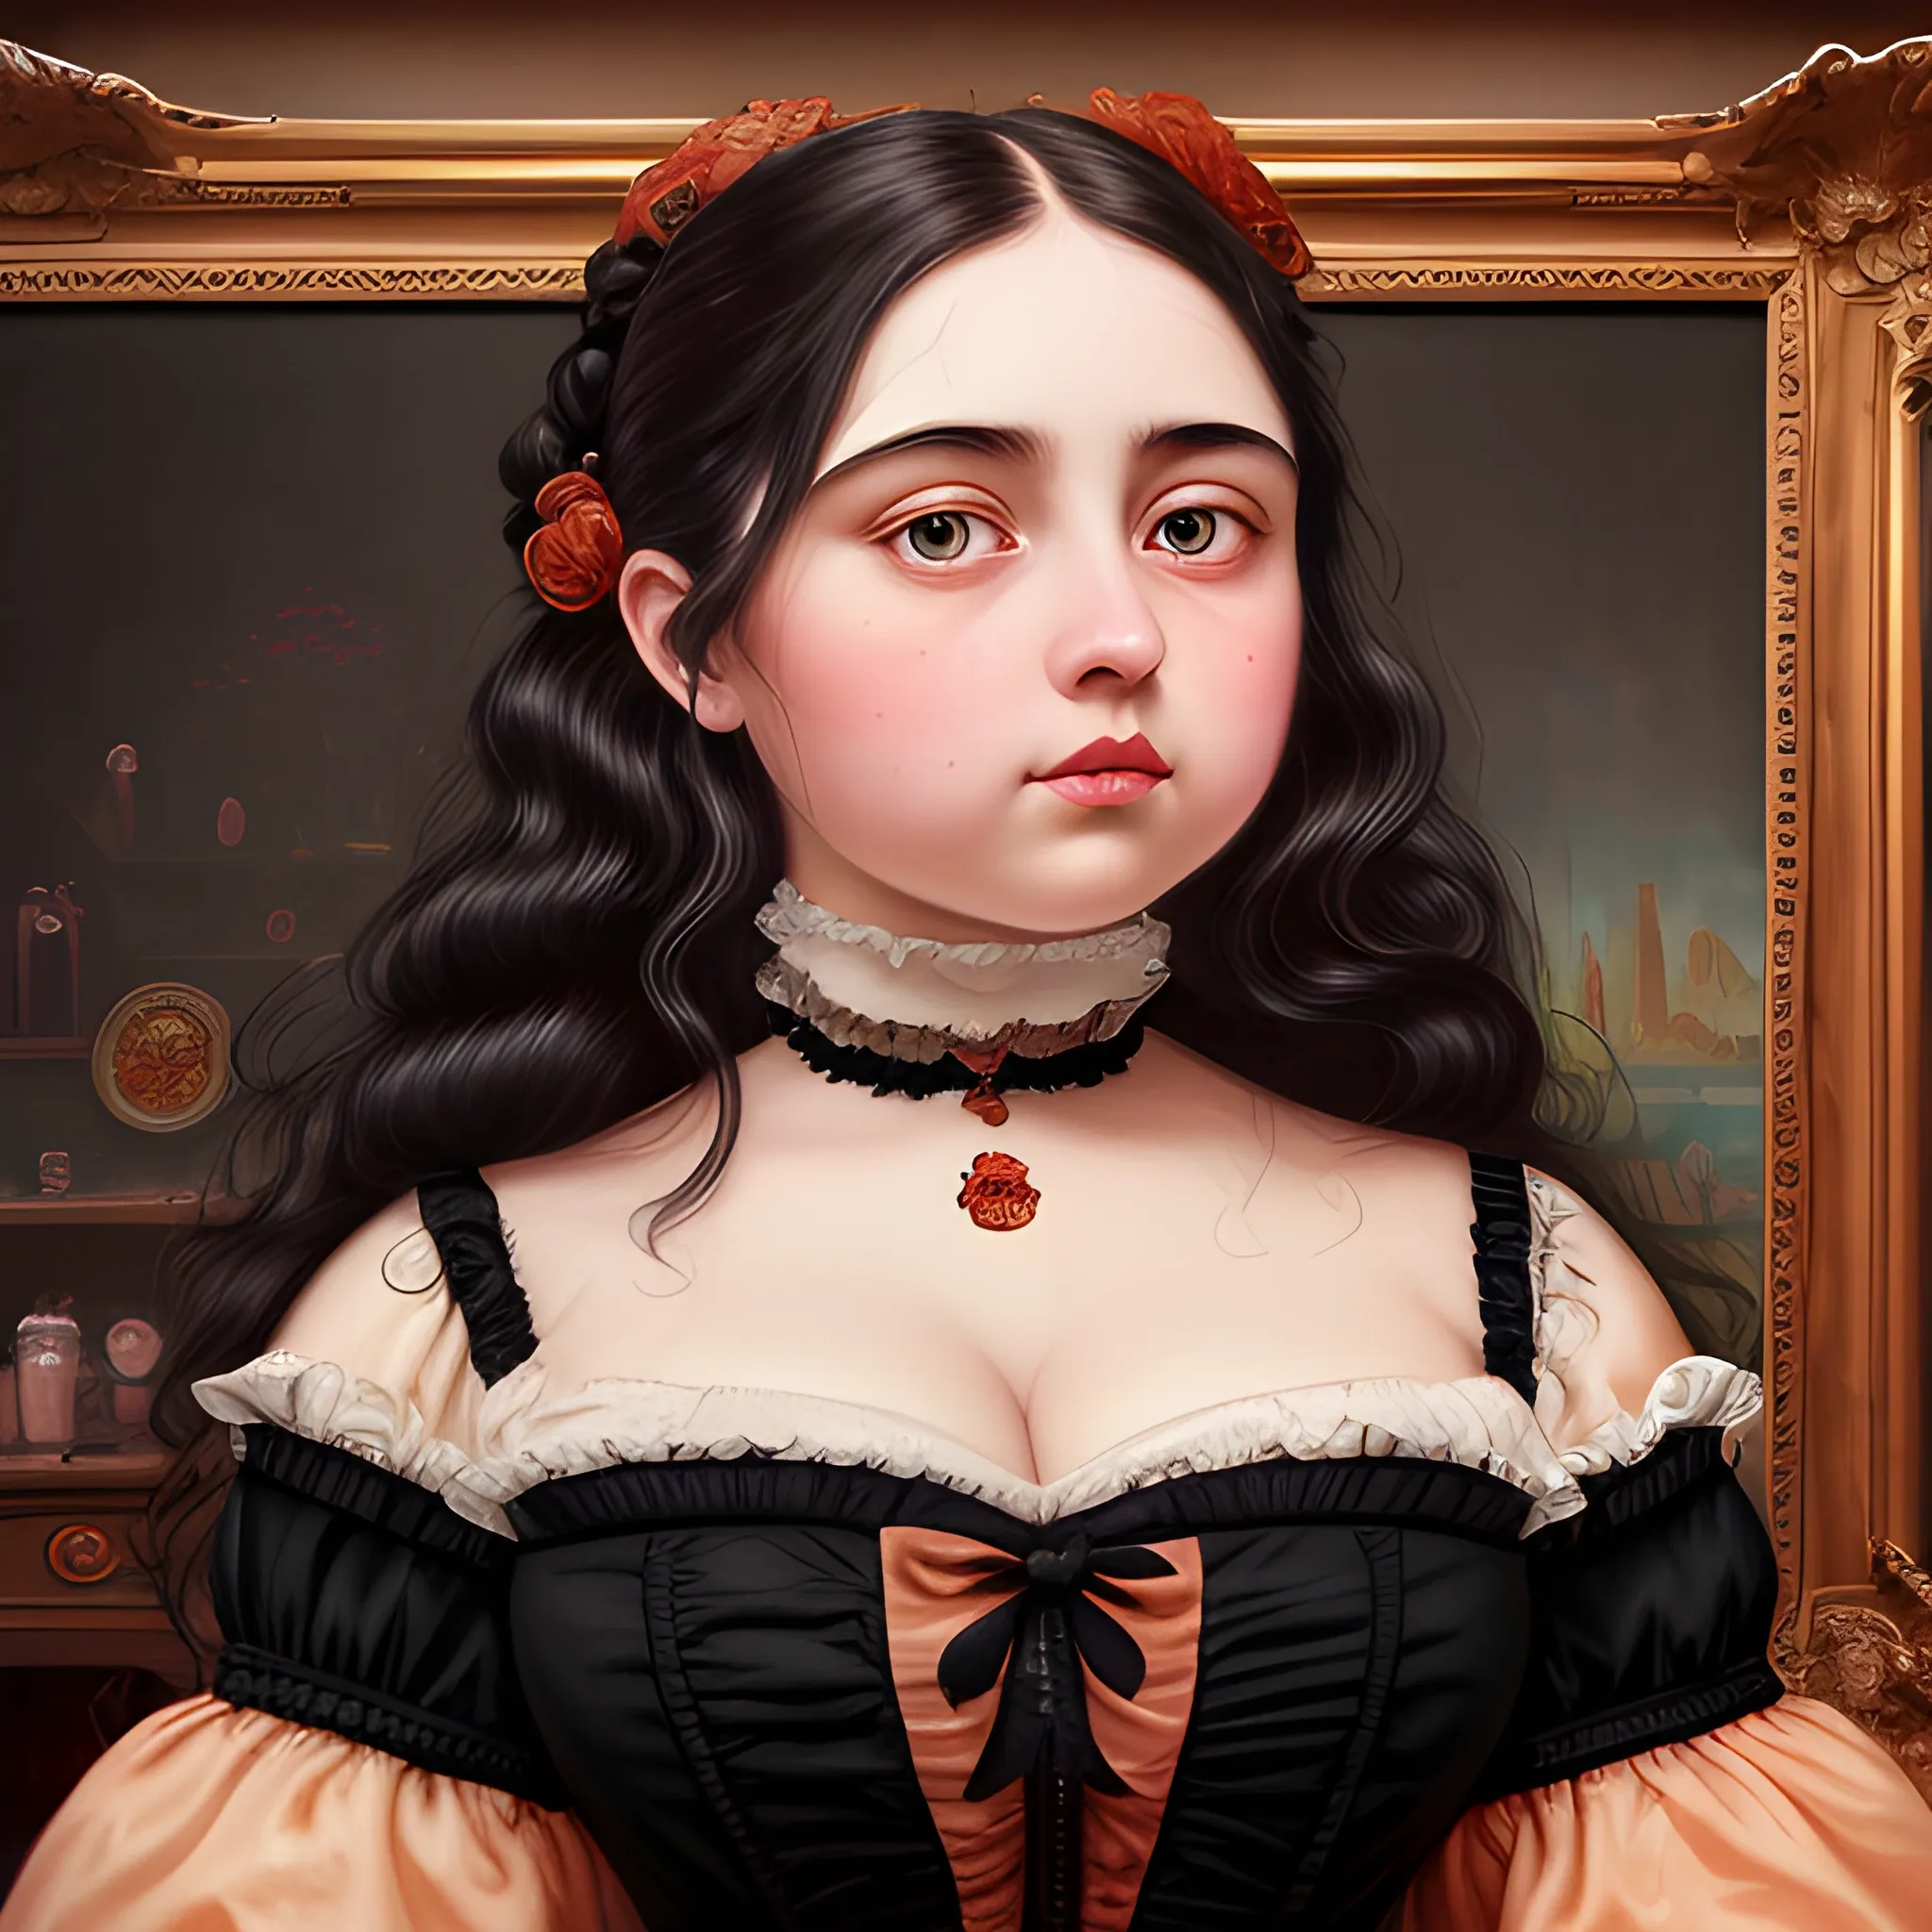 (((high detail))), best quality, Warm Colors, (detailed), (high resolution)Black long-haired female, curvy face, with rosy cheeks, big black eyes, thick eyelashes, thick peach lips, thick eyebrows, nose upturned, with a black and red dress, victorian room of backround Trippy, Oil Painting, wallper 